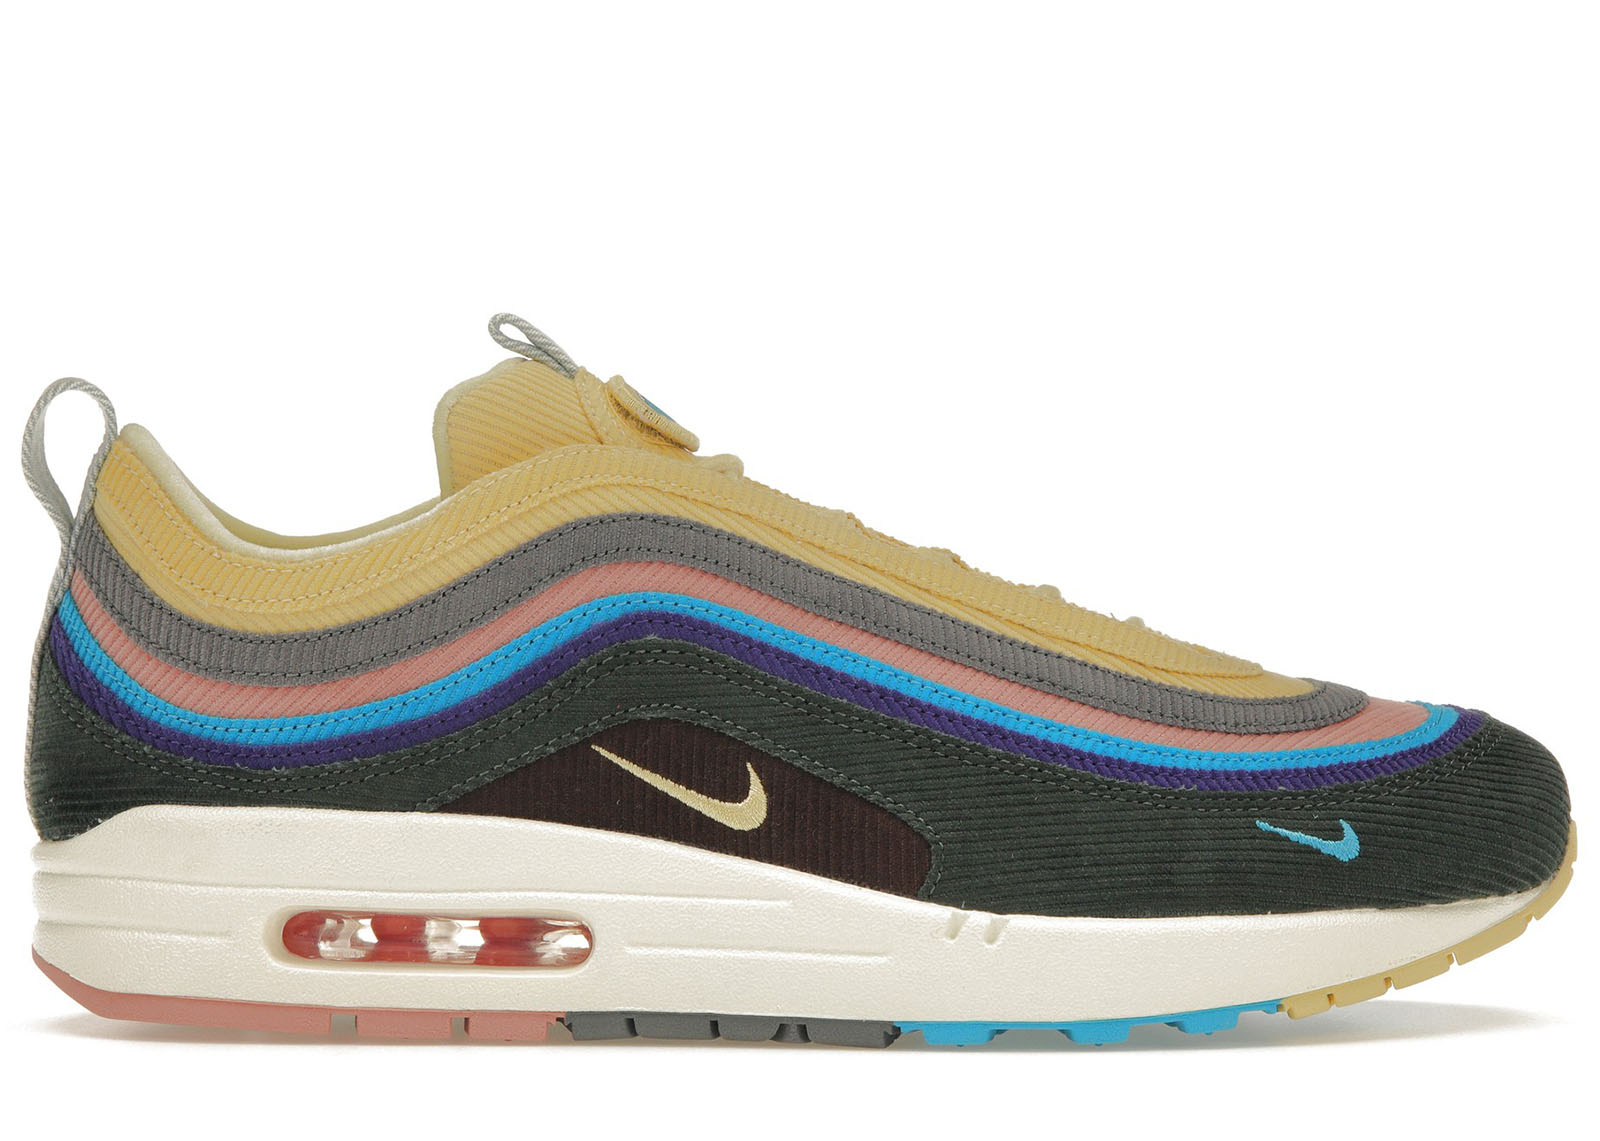 Nike Air Max 1/97 Sean Wotherspoon (All Accessories and Dustbag 